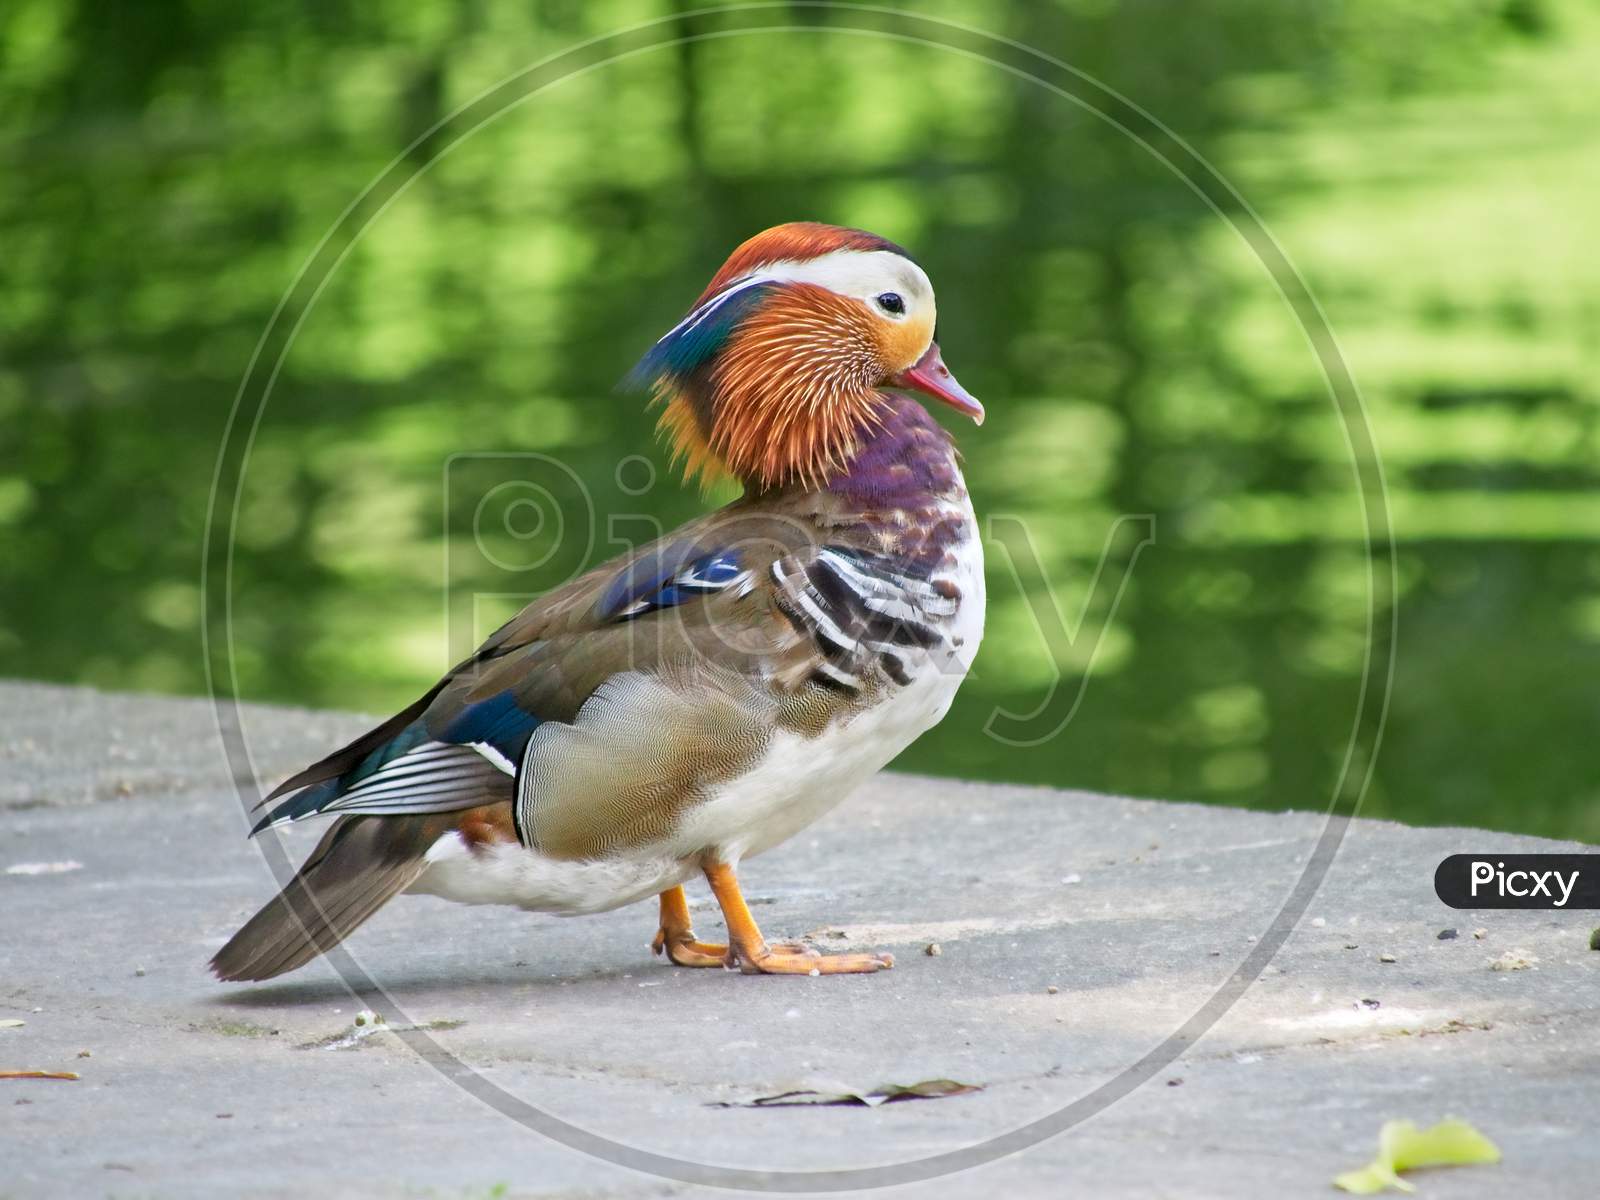 Mandarin Duck Male Over The Pond In The Park.